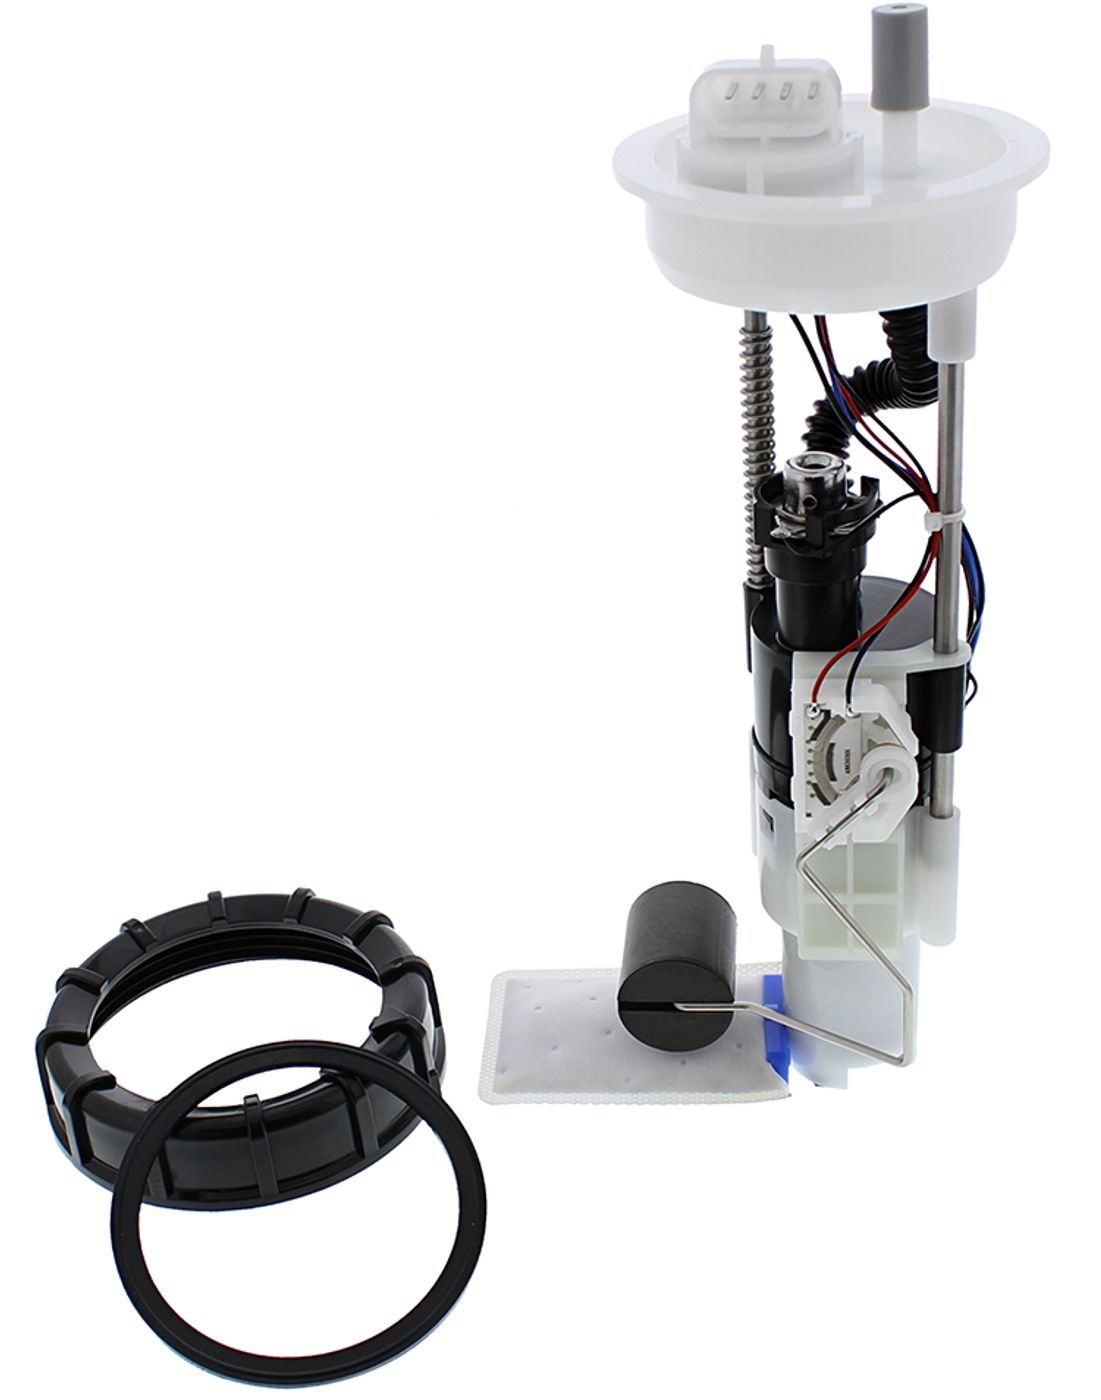 Wrp Fuel Pump Modules - WRP471011 image